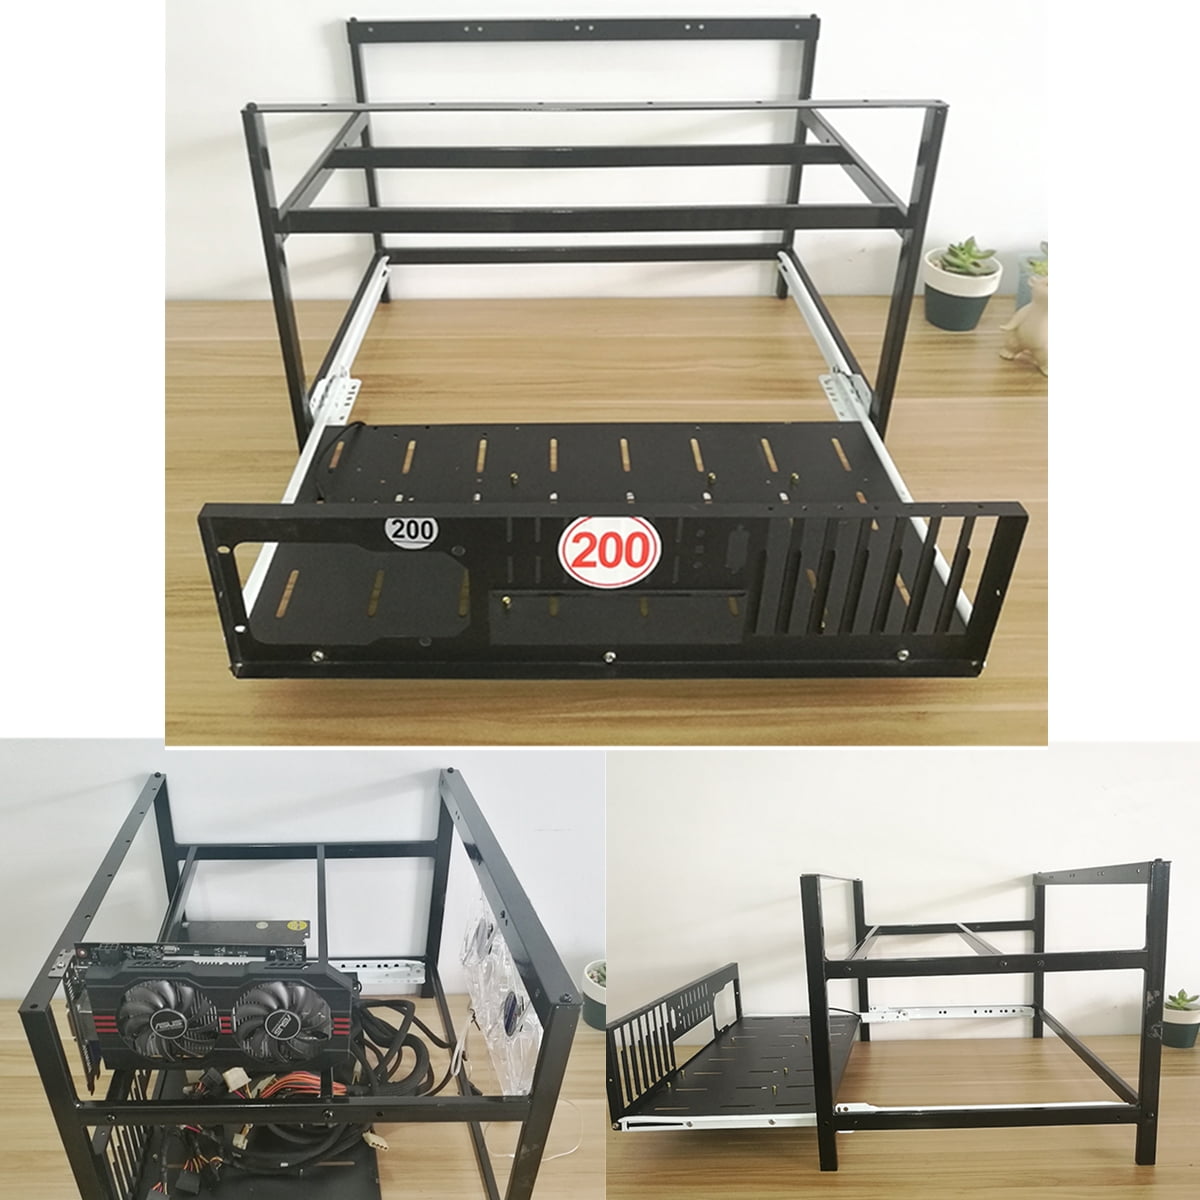 Open Air Miner Mining Frame Rig Iron Case Crypto Coin For 6 GPU ETH BTC Ethereum